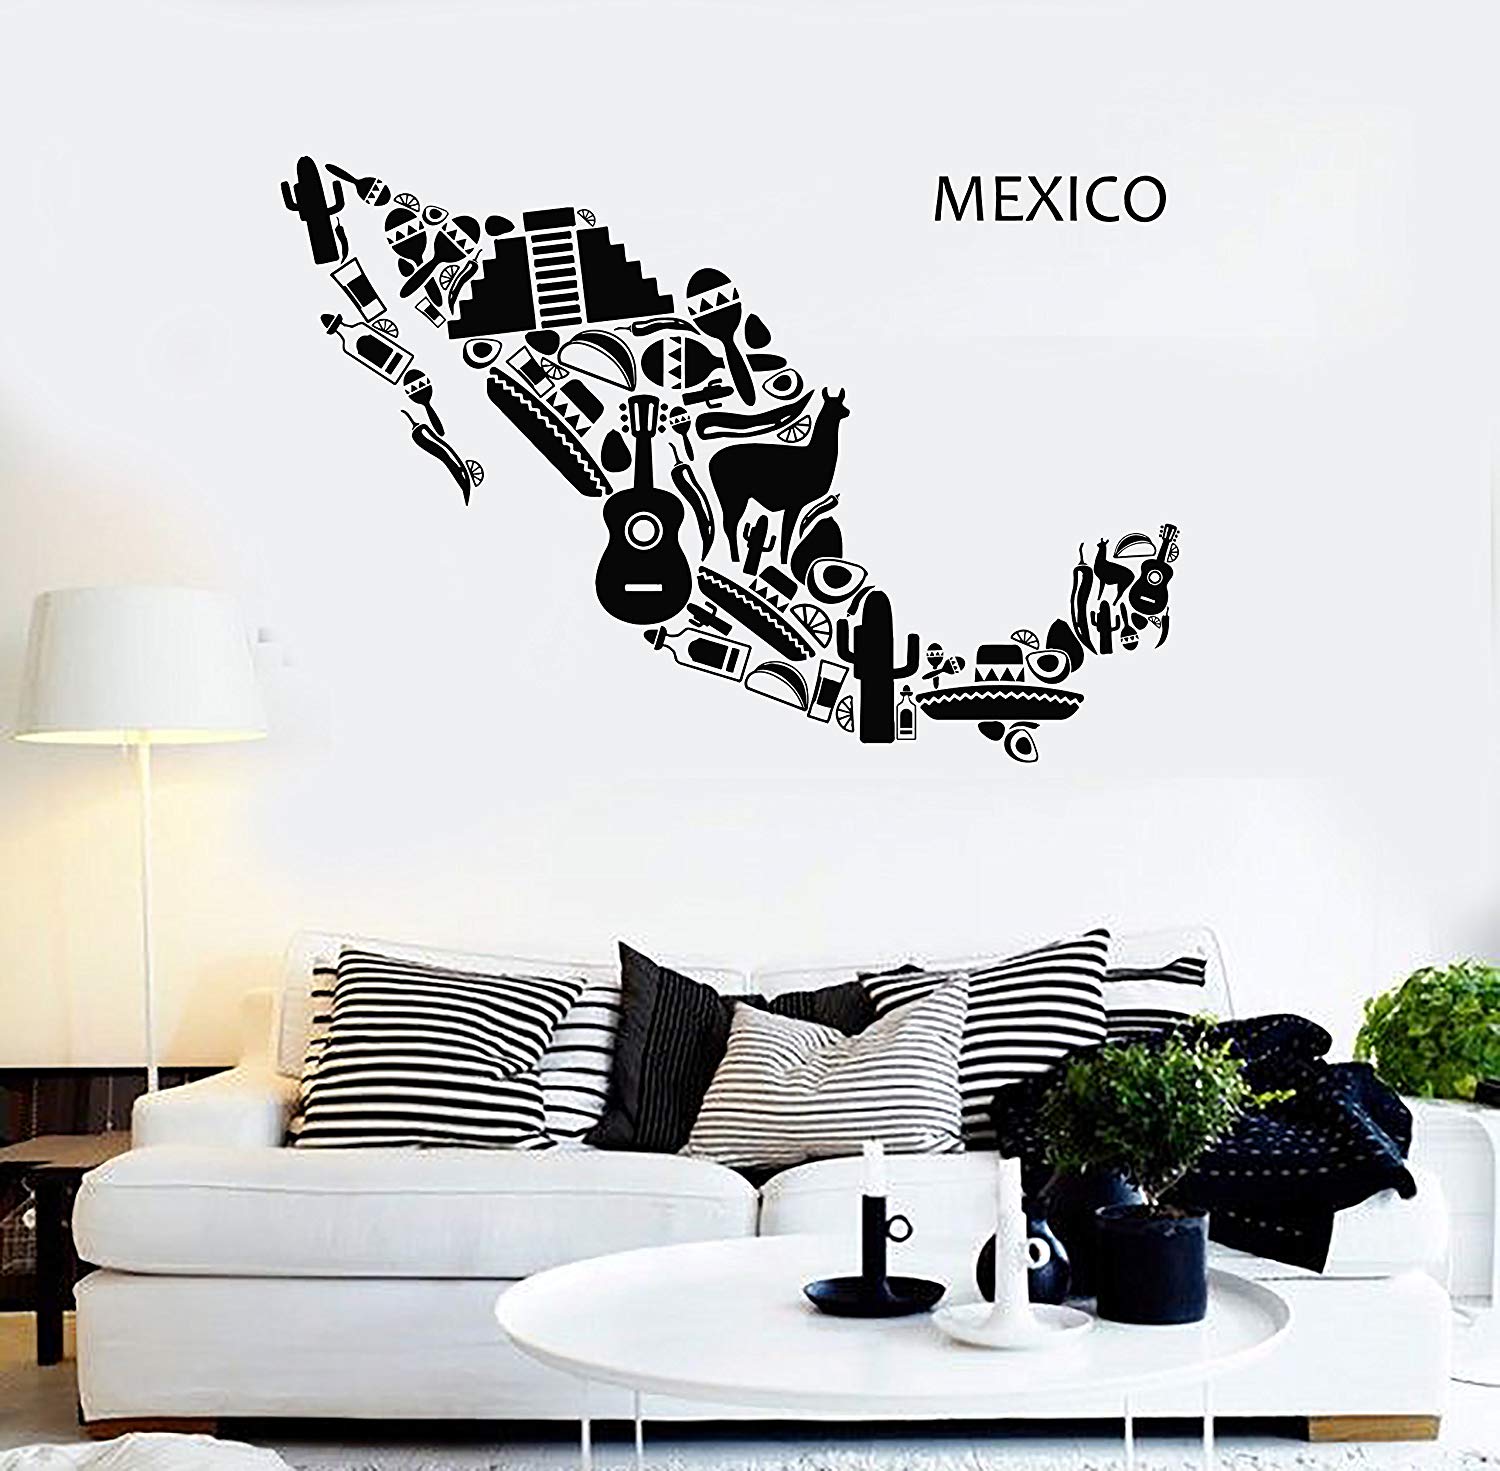 Vinyl Decal Wall Sticker Mexico Mexican Latin American - Female Face Wall Decal - HD Wallpaper 